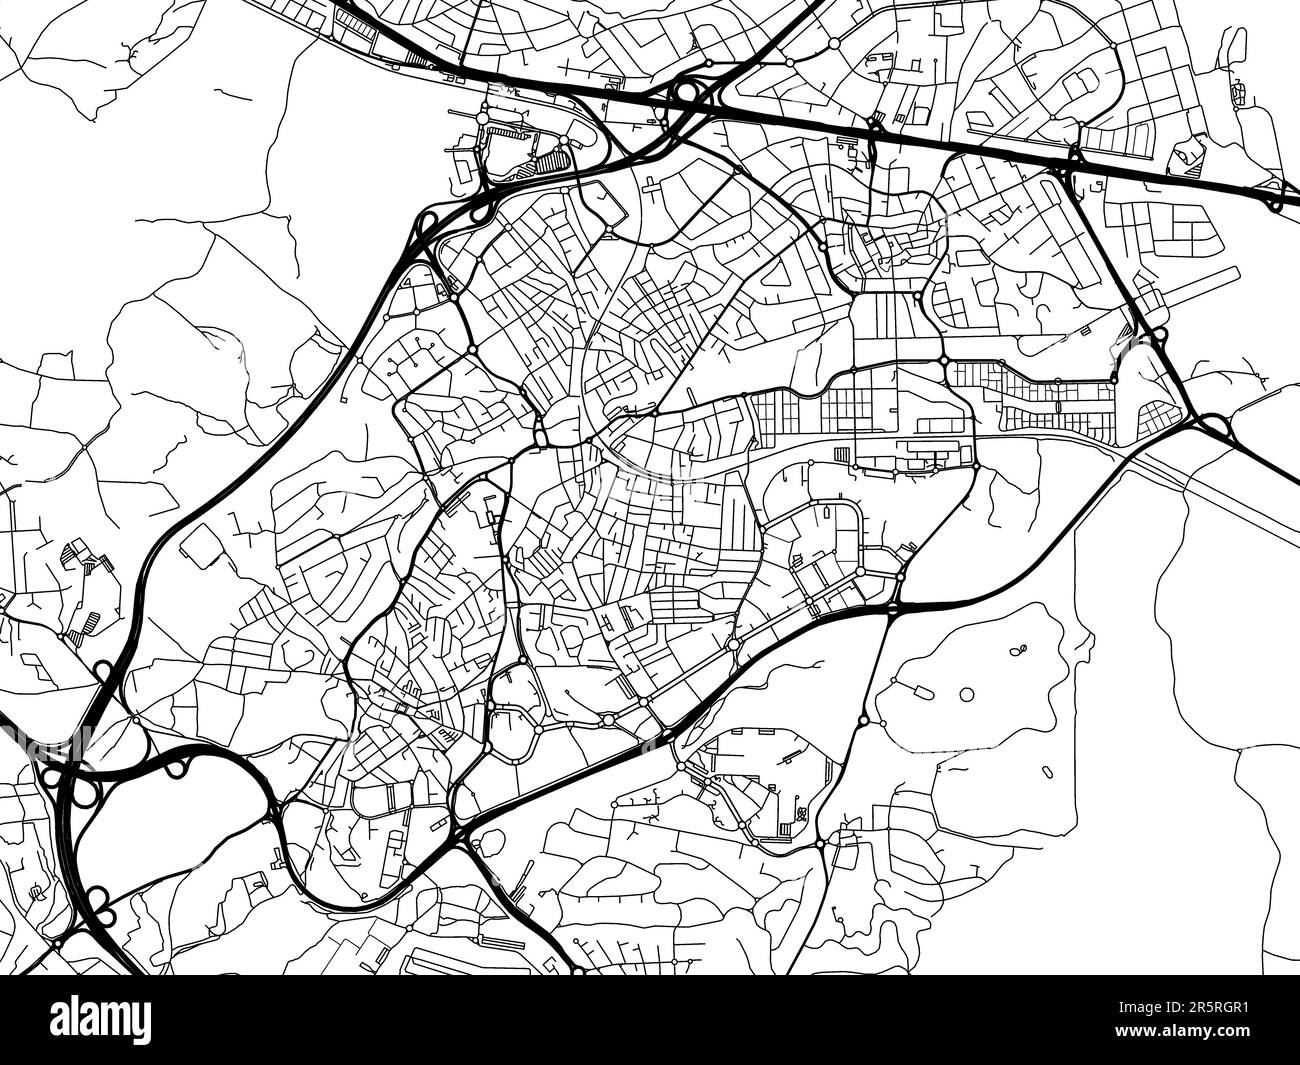 Vector road map of the city of  Pozuelo de Alarcon in Spain on a white background. Stock Photo